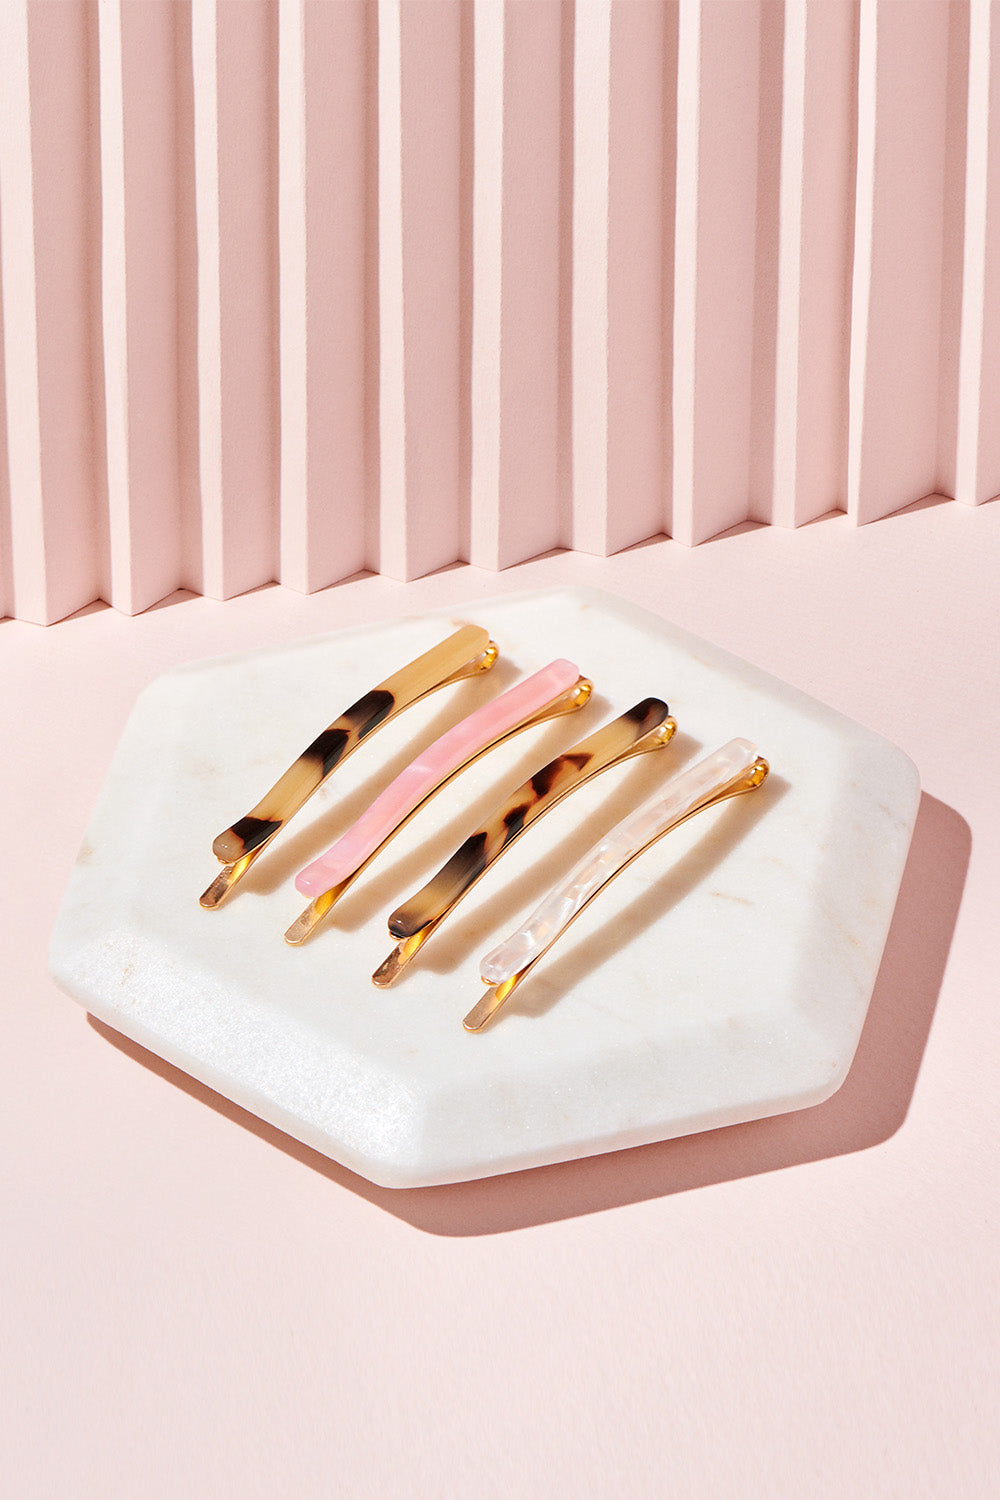 The Hair Edit slim multicolored marble bobby pin set in pink, white & beige/brown on pink display